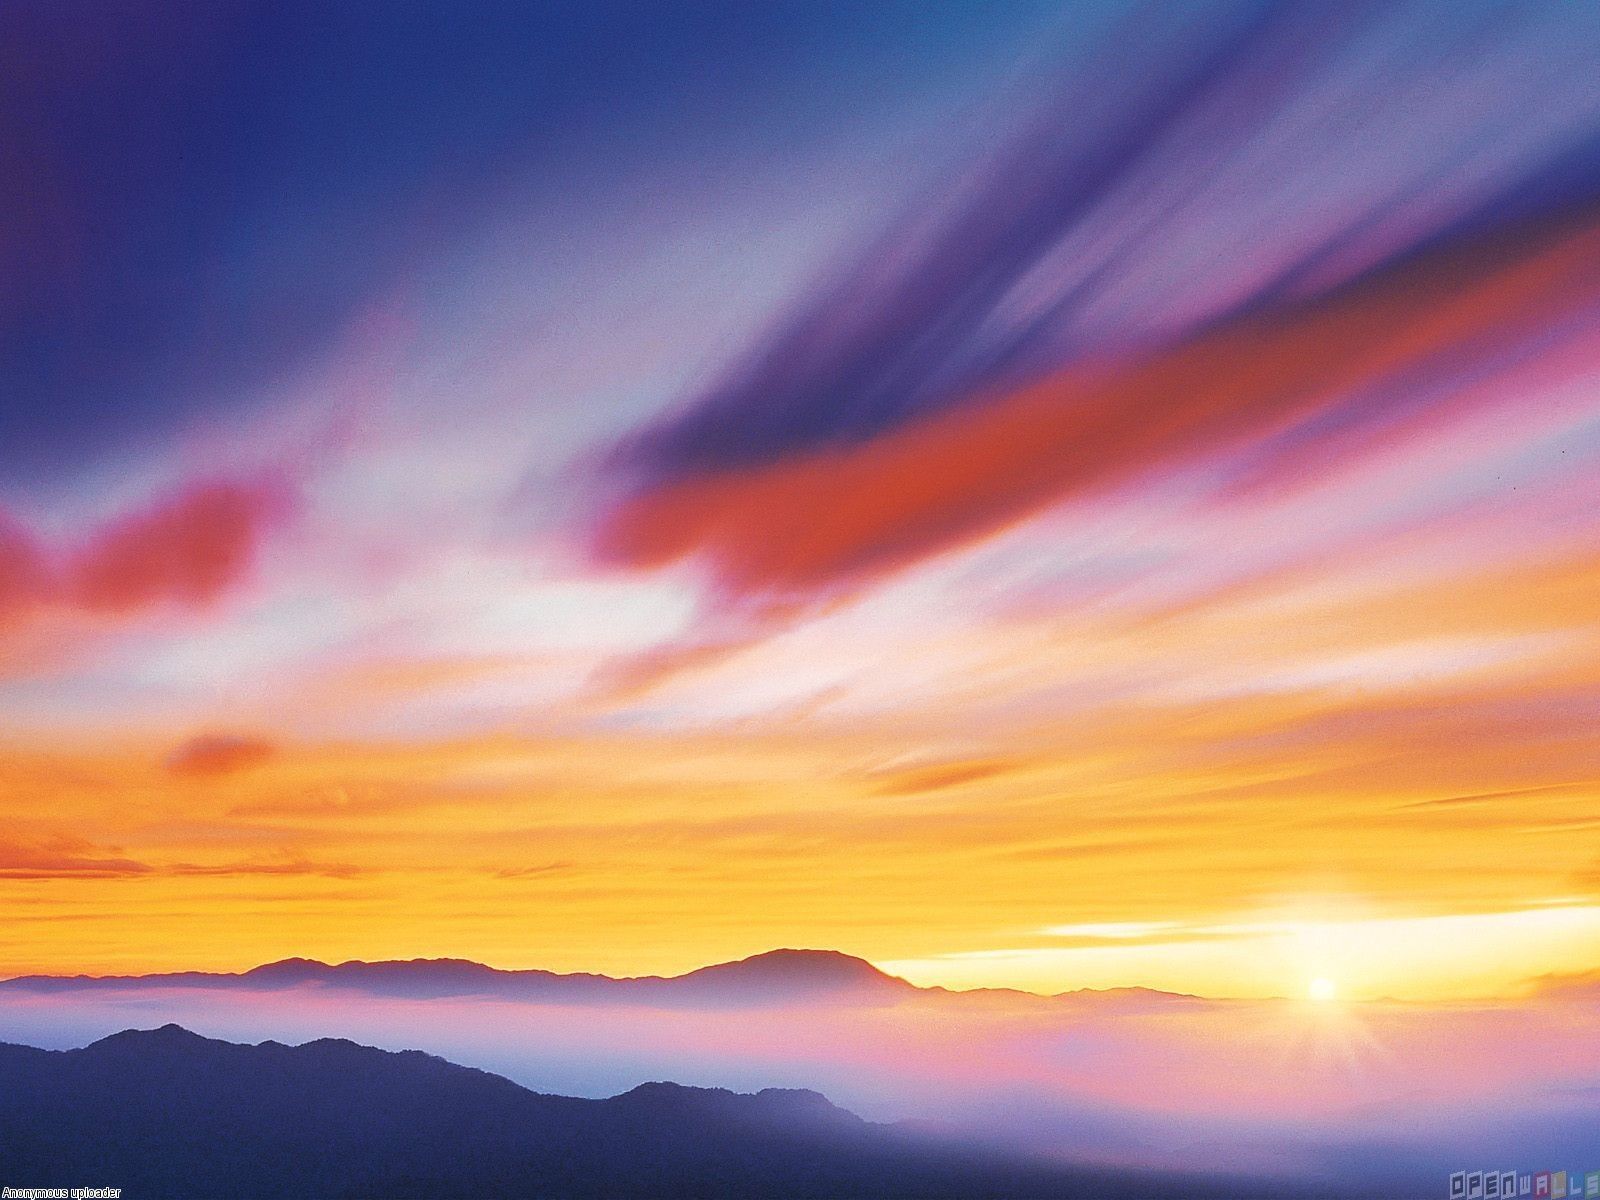 Colorful Sky Background Wallpaper 04117